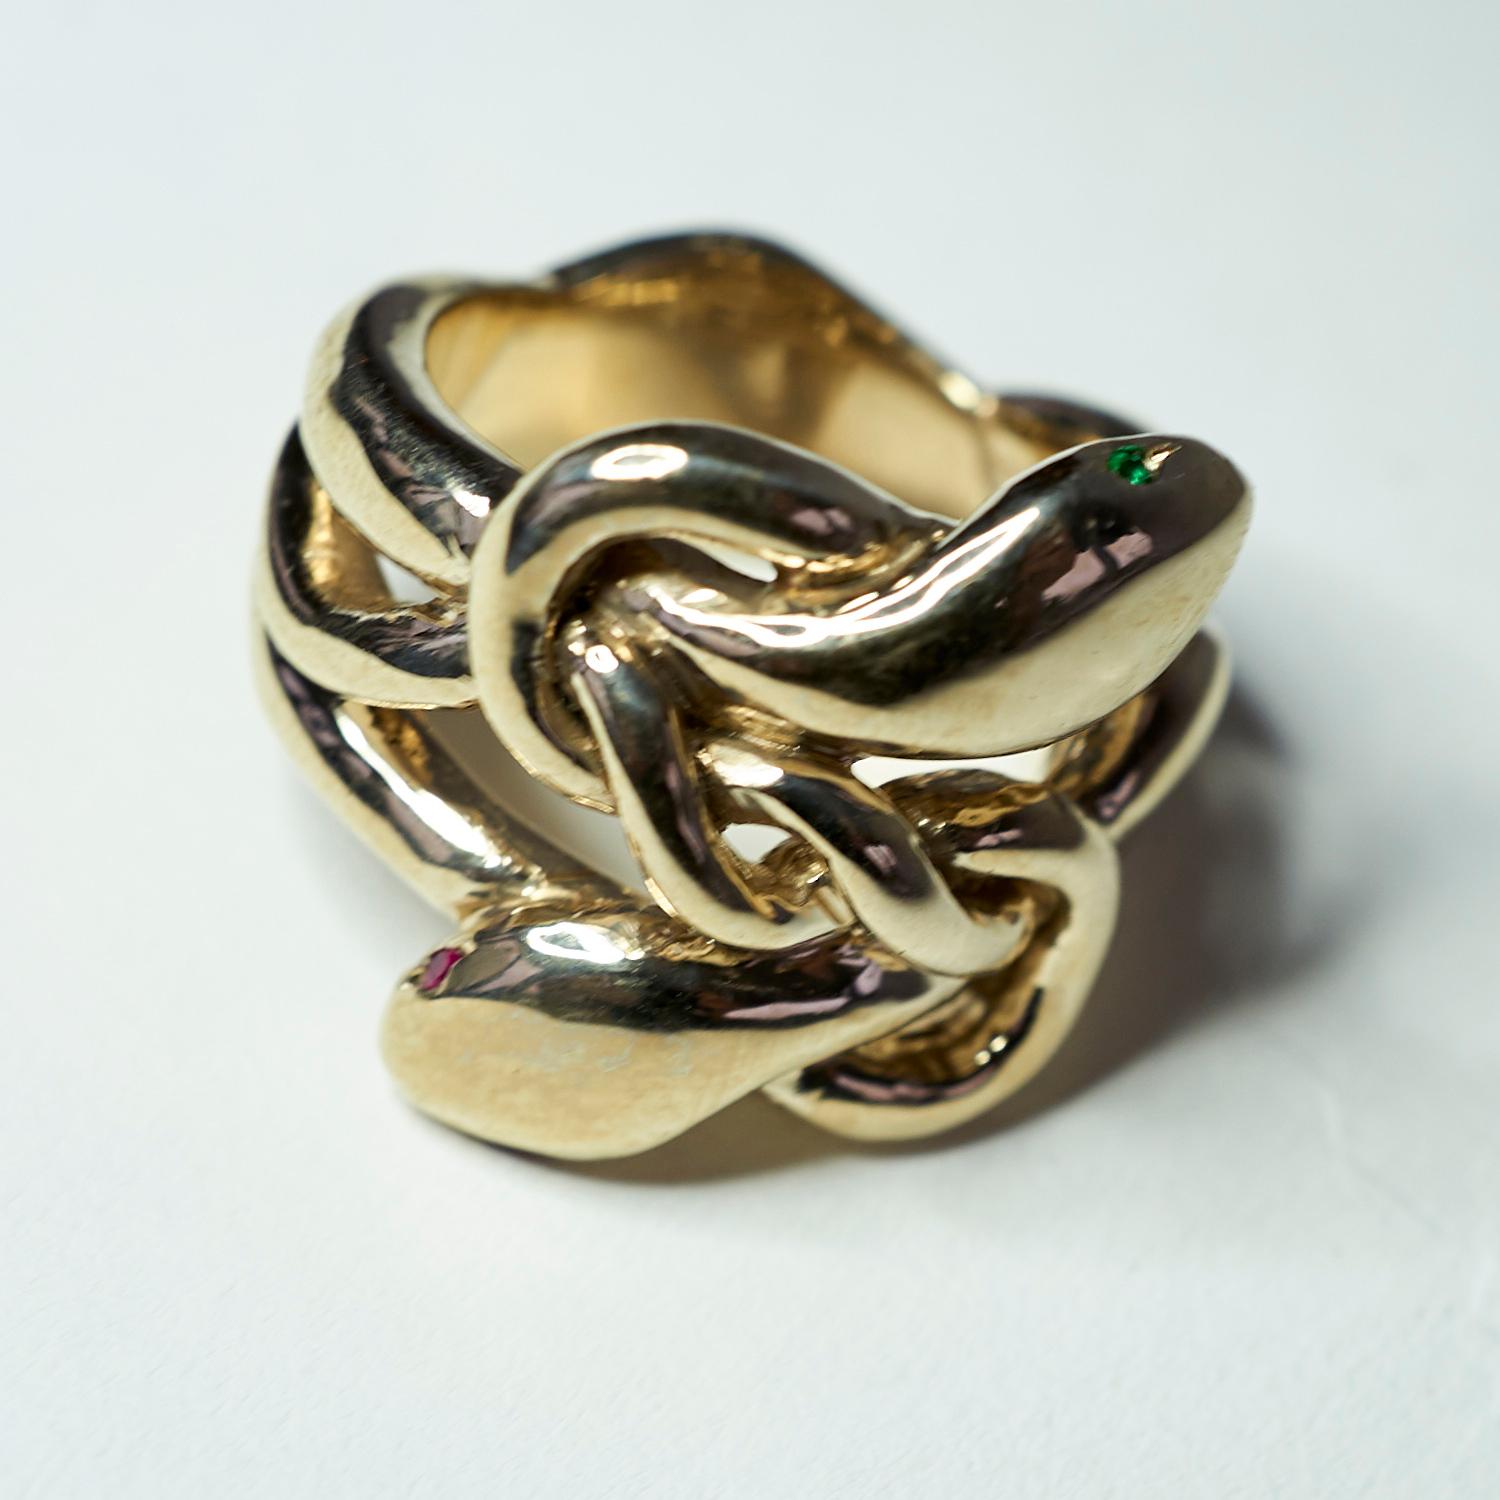 Emerald Ruby Snake Ring Victorian Style Cocktail Ring Bronze J Dauphin

2 pcs Emerald 2 pcs Ruby eyes on two Snake head Ring Victorian Style
J DAUPHIN 